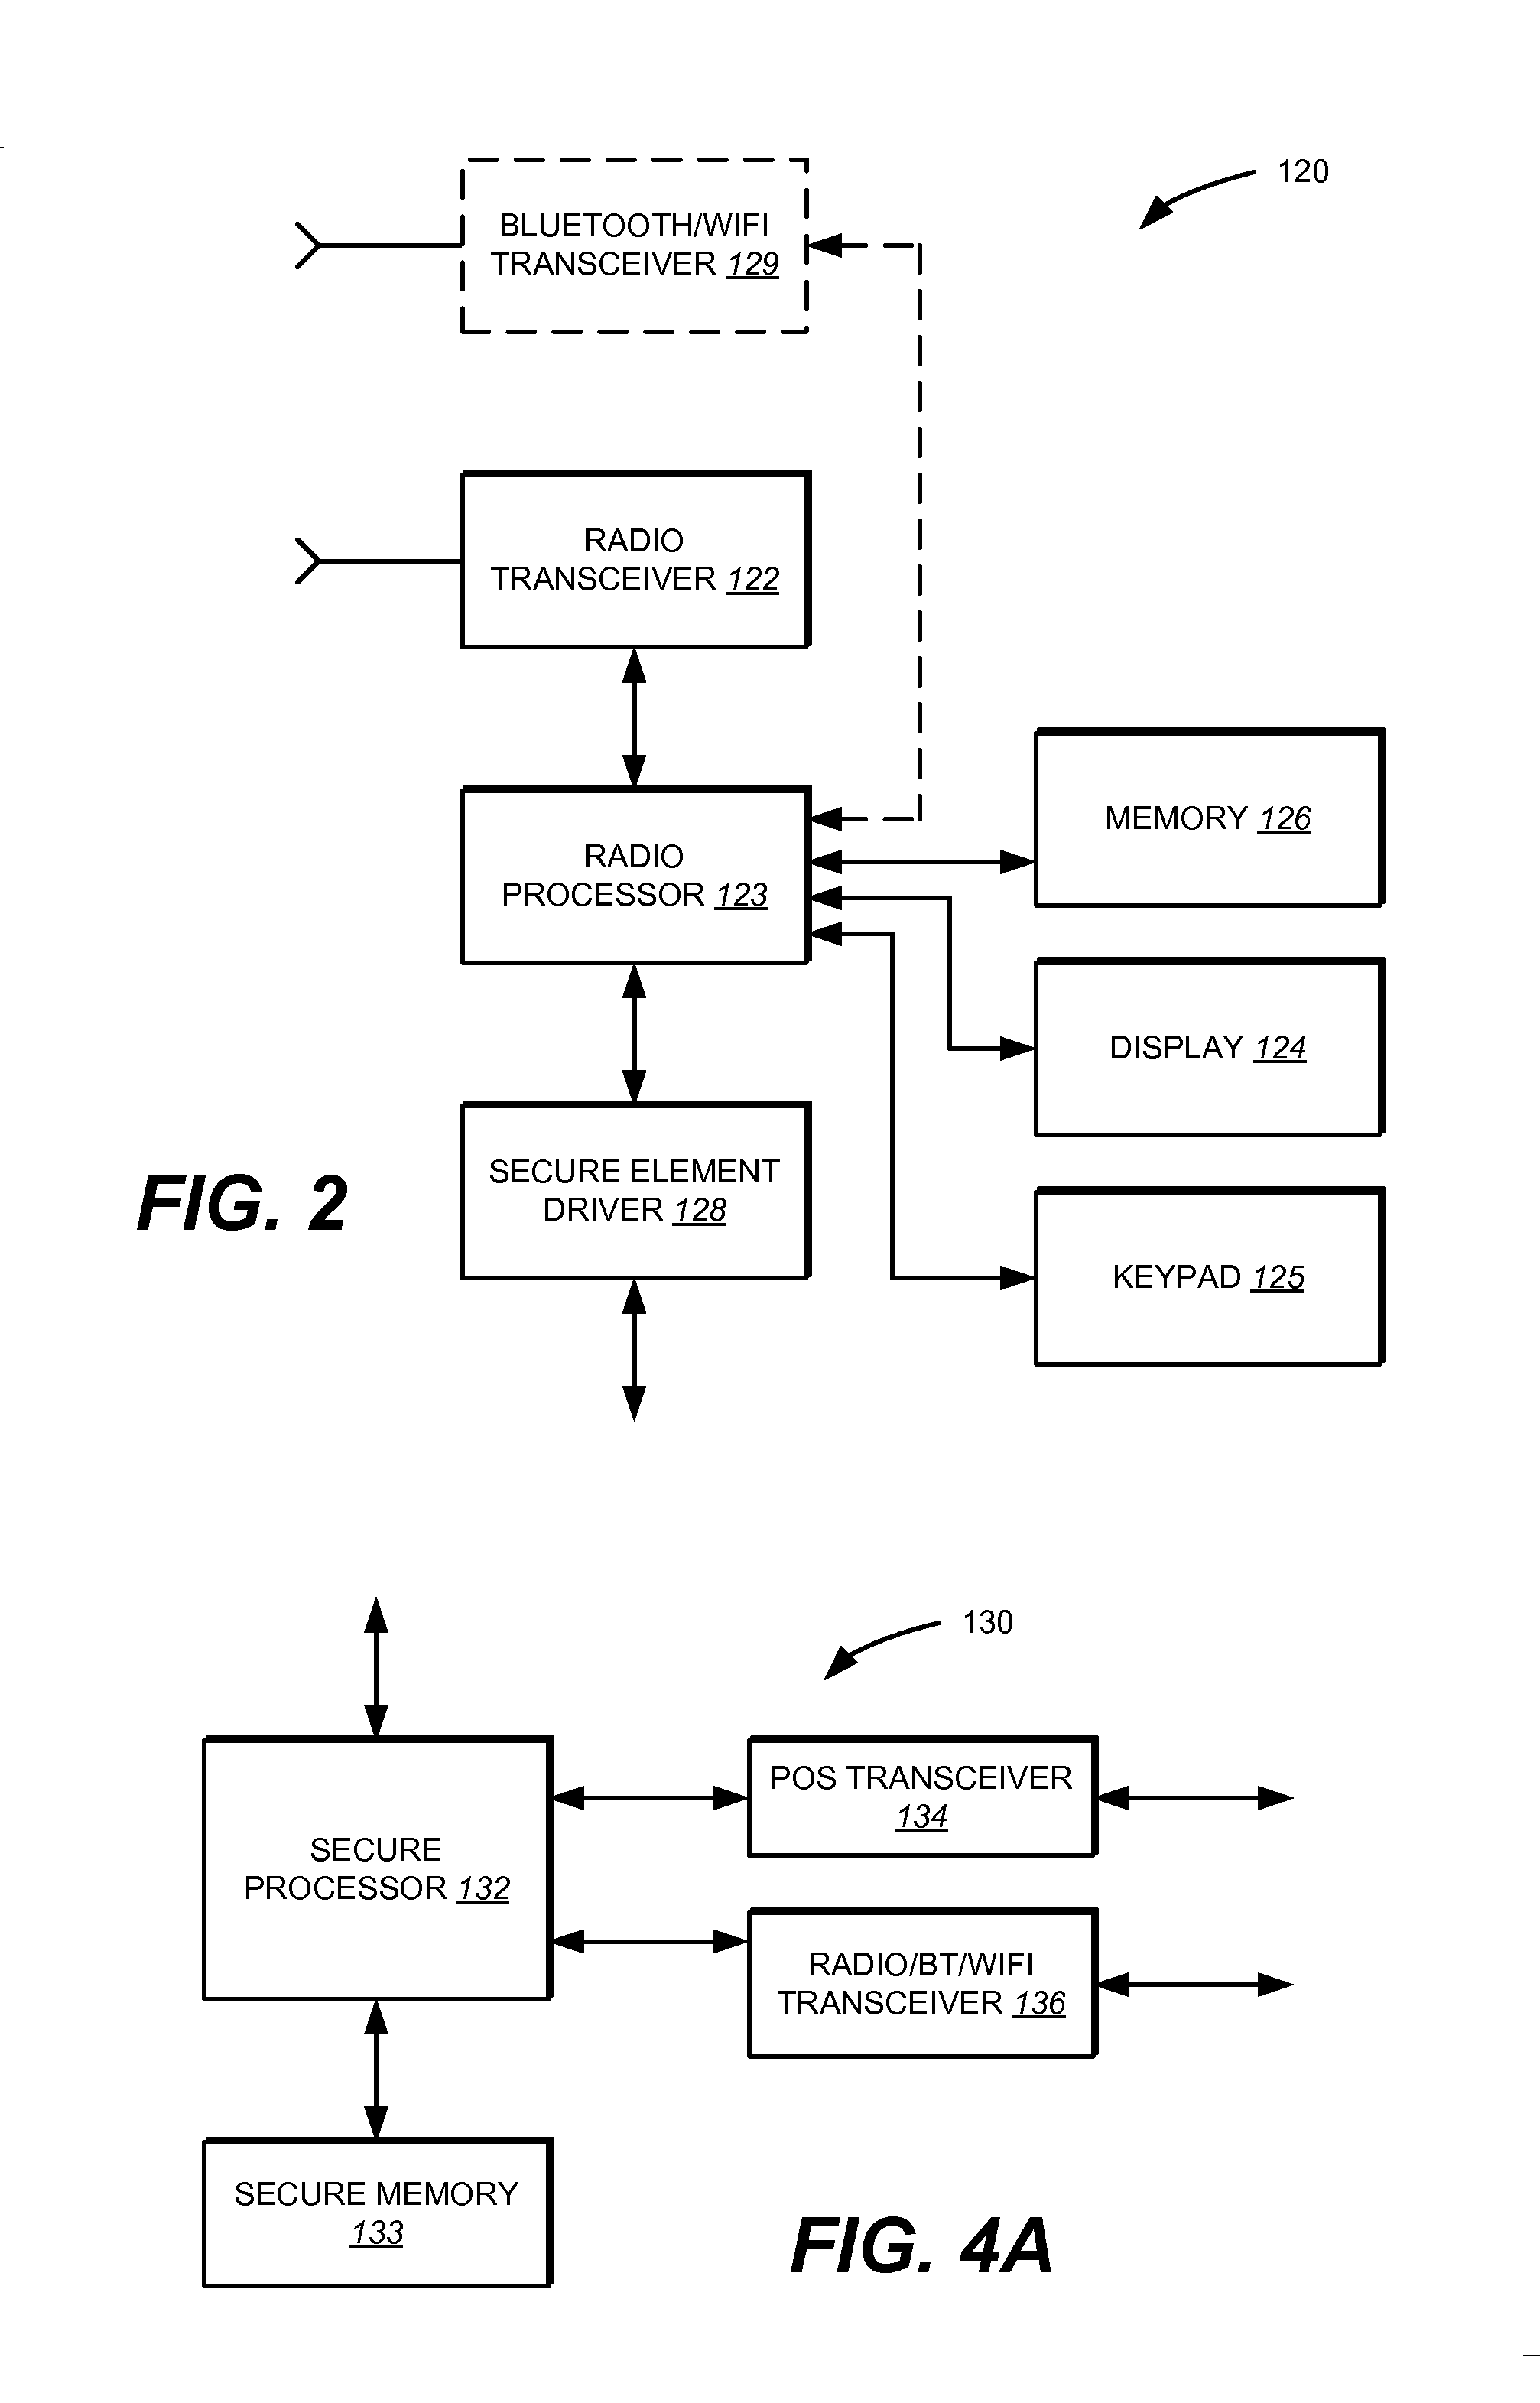 Method and system for adapting a wireless mobile communication device for wireless transactions